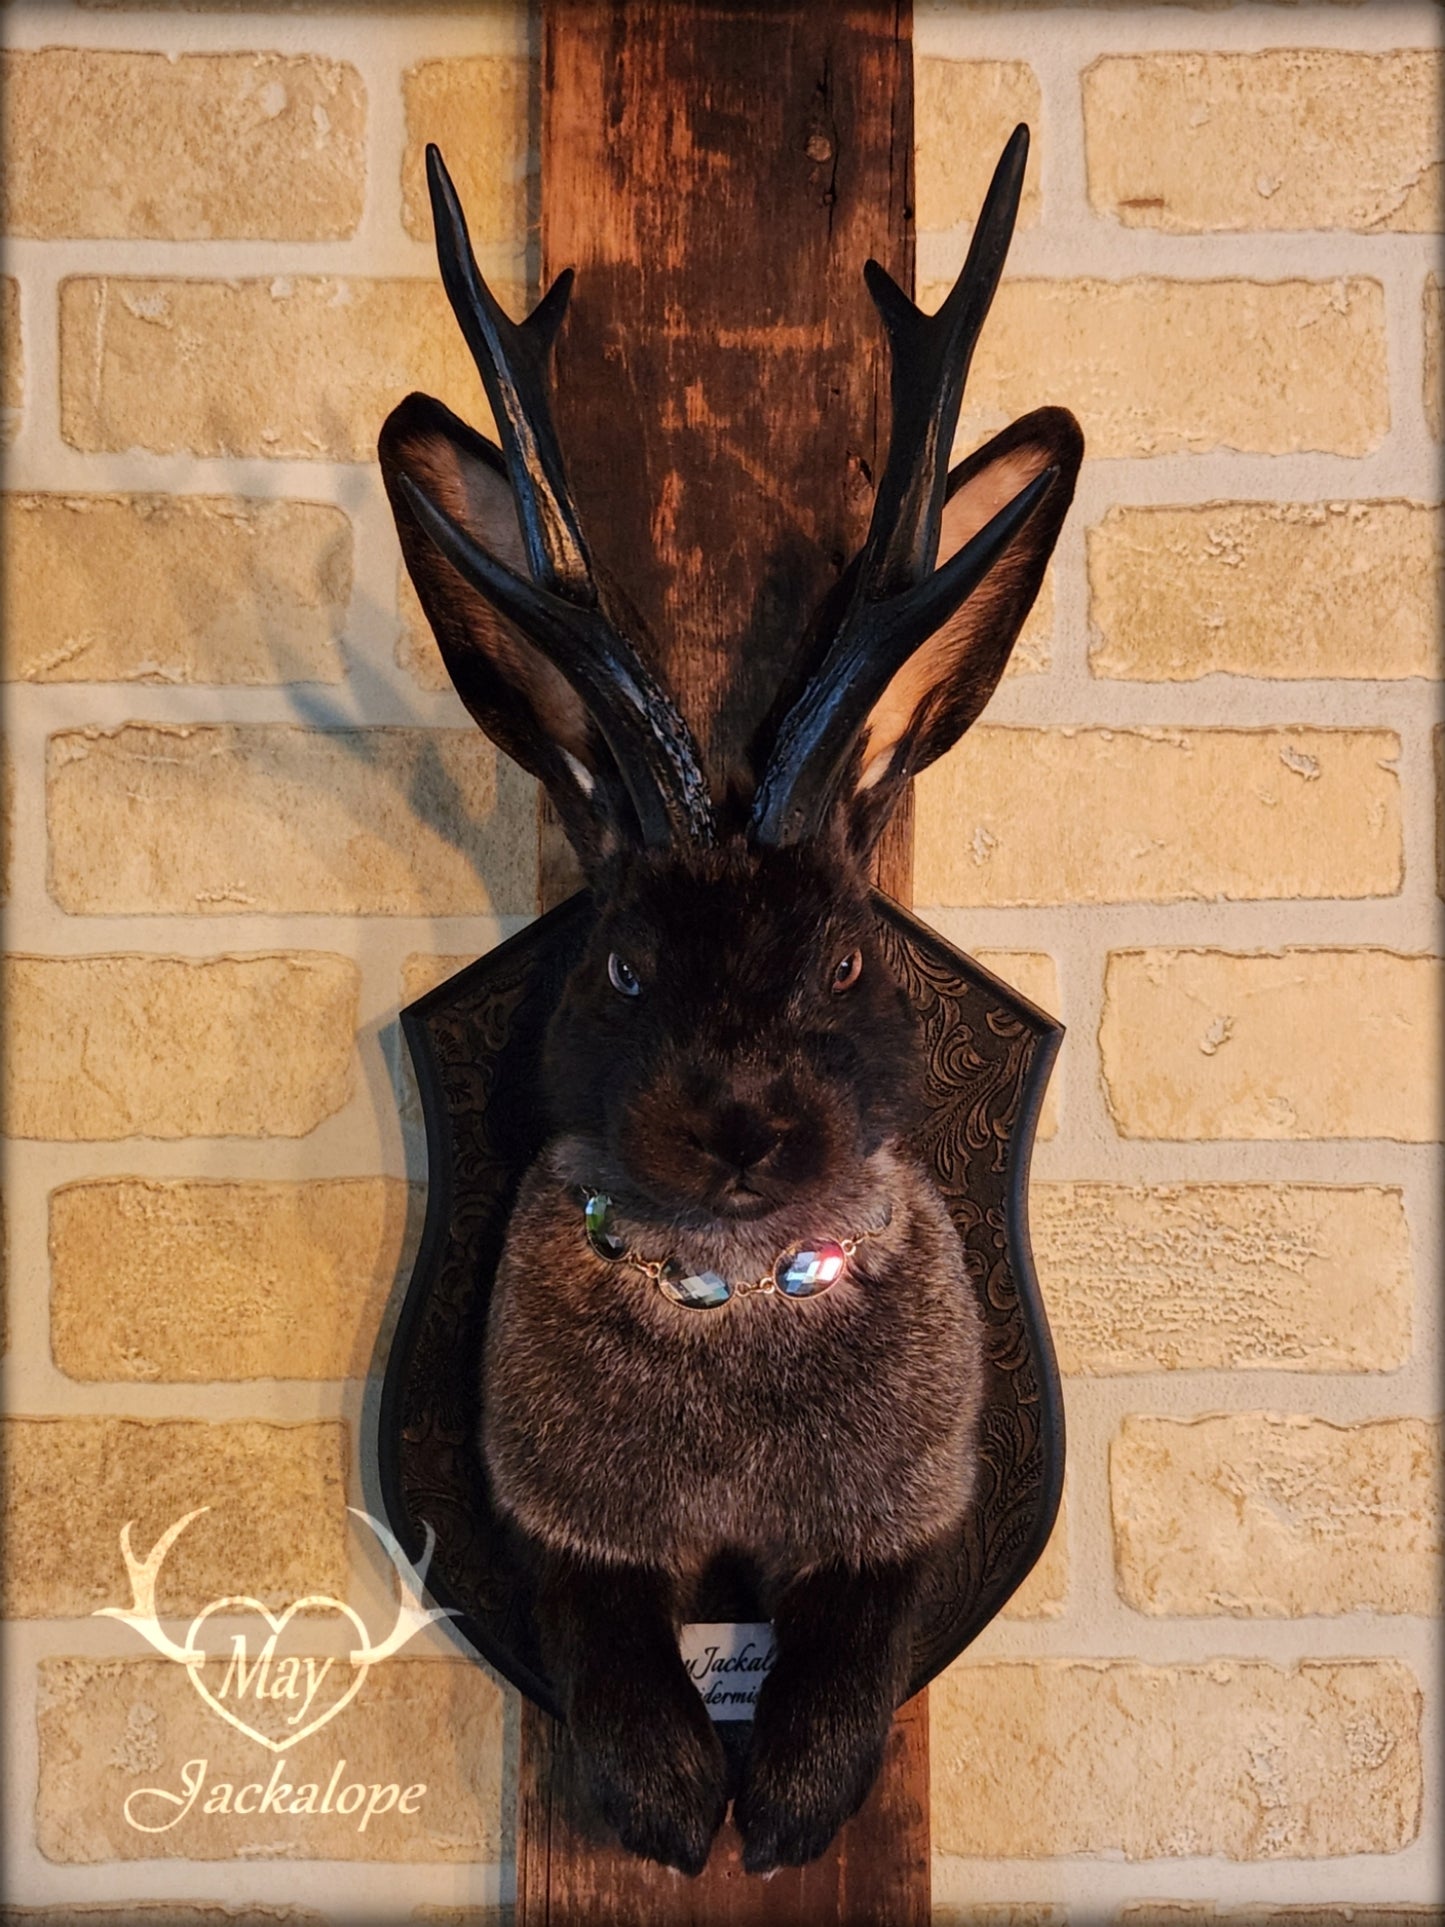 Black & grey Jackalope taxidermy with black antlers replica, heterochromia eyes on a decorated plaque.